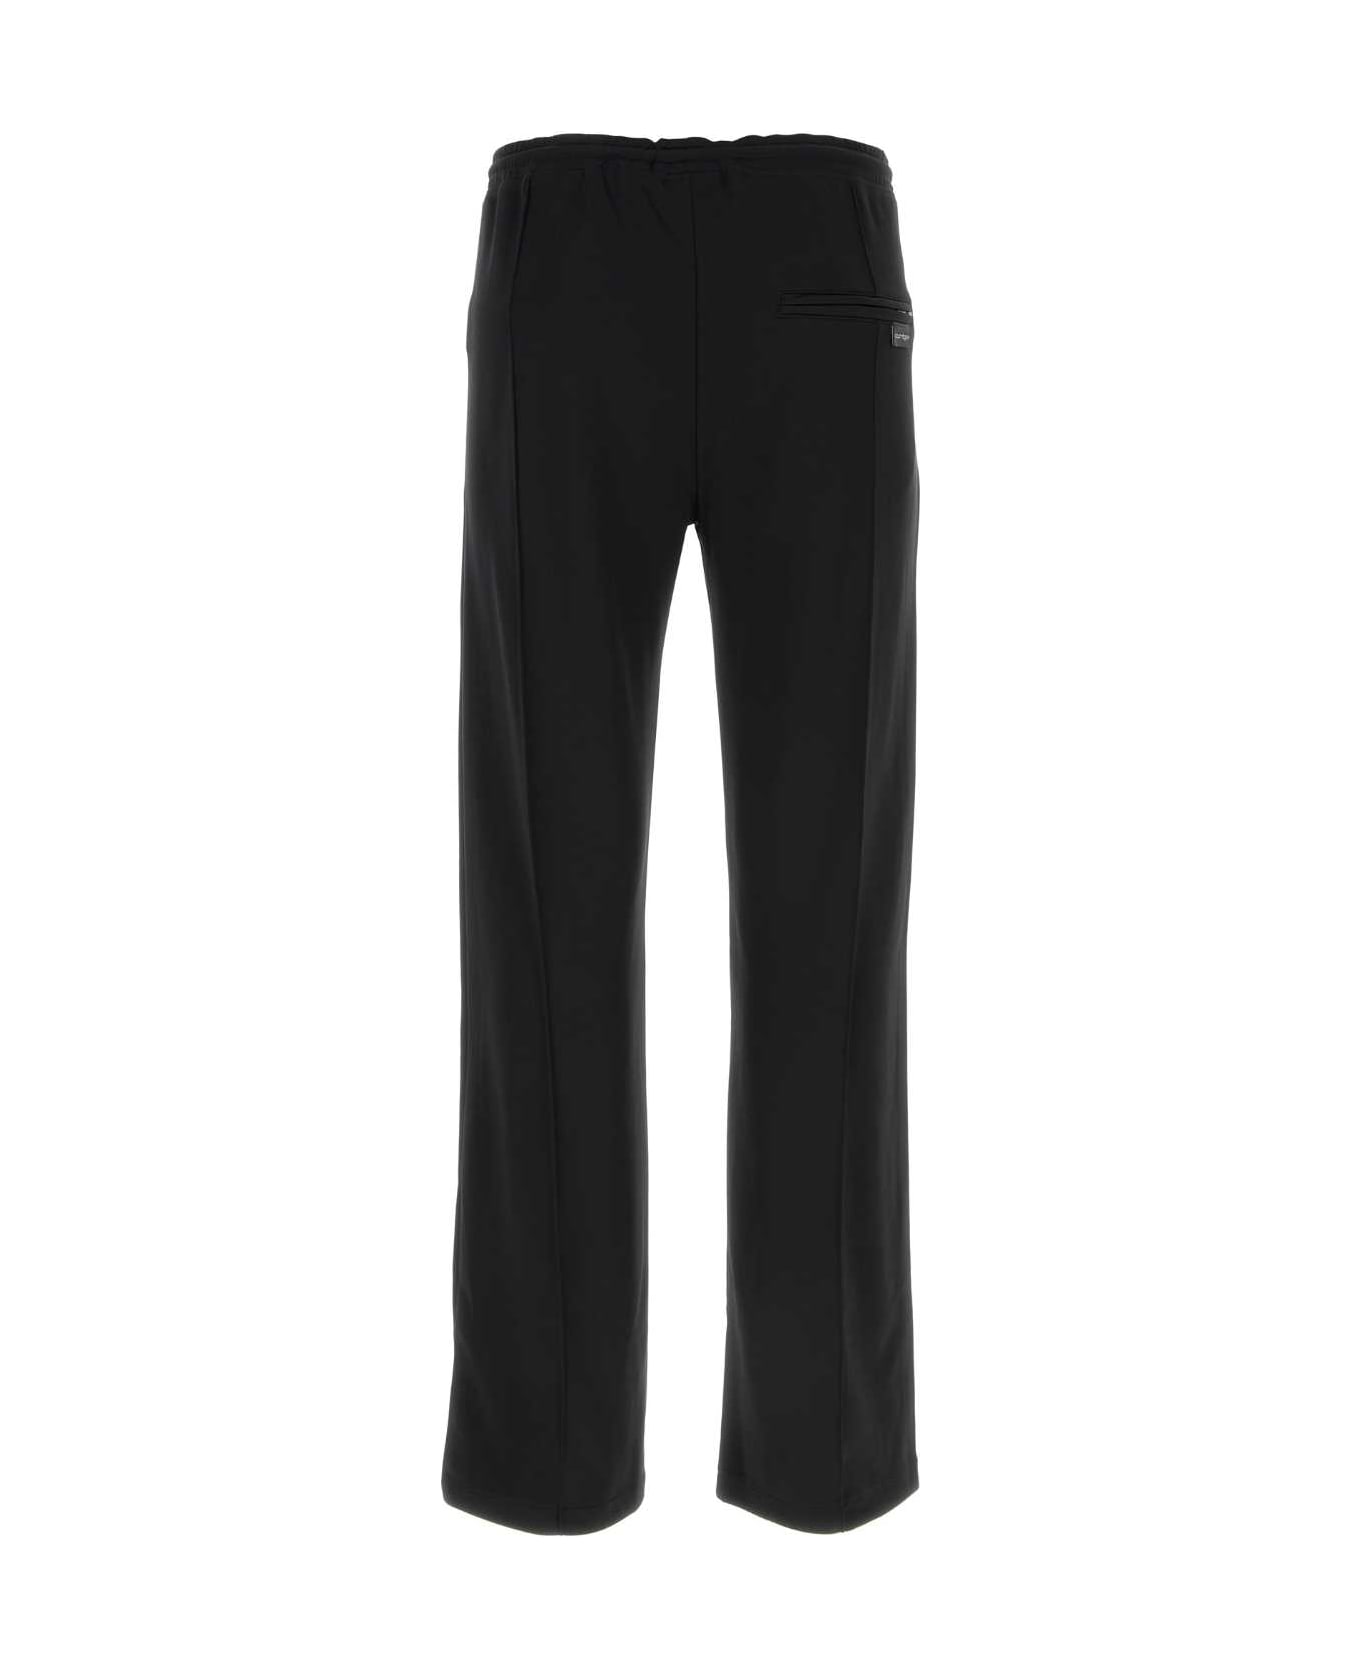 Courrèges Black Polyester Joggers - Black ボトムス